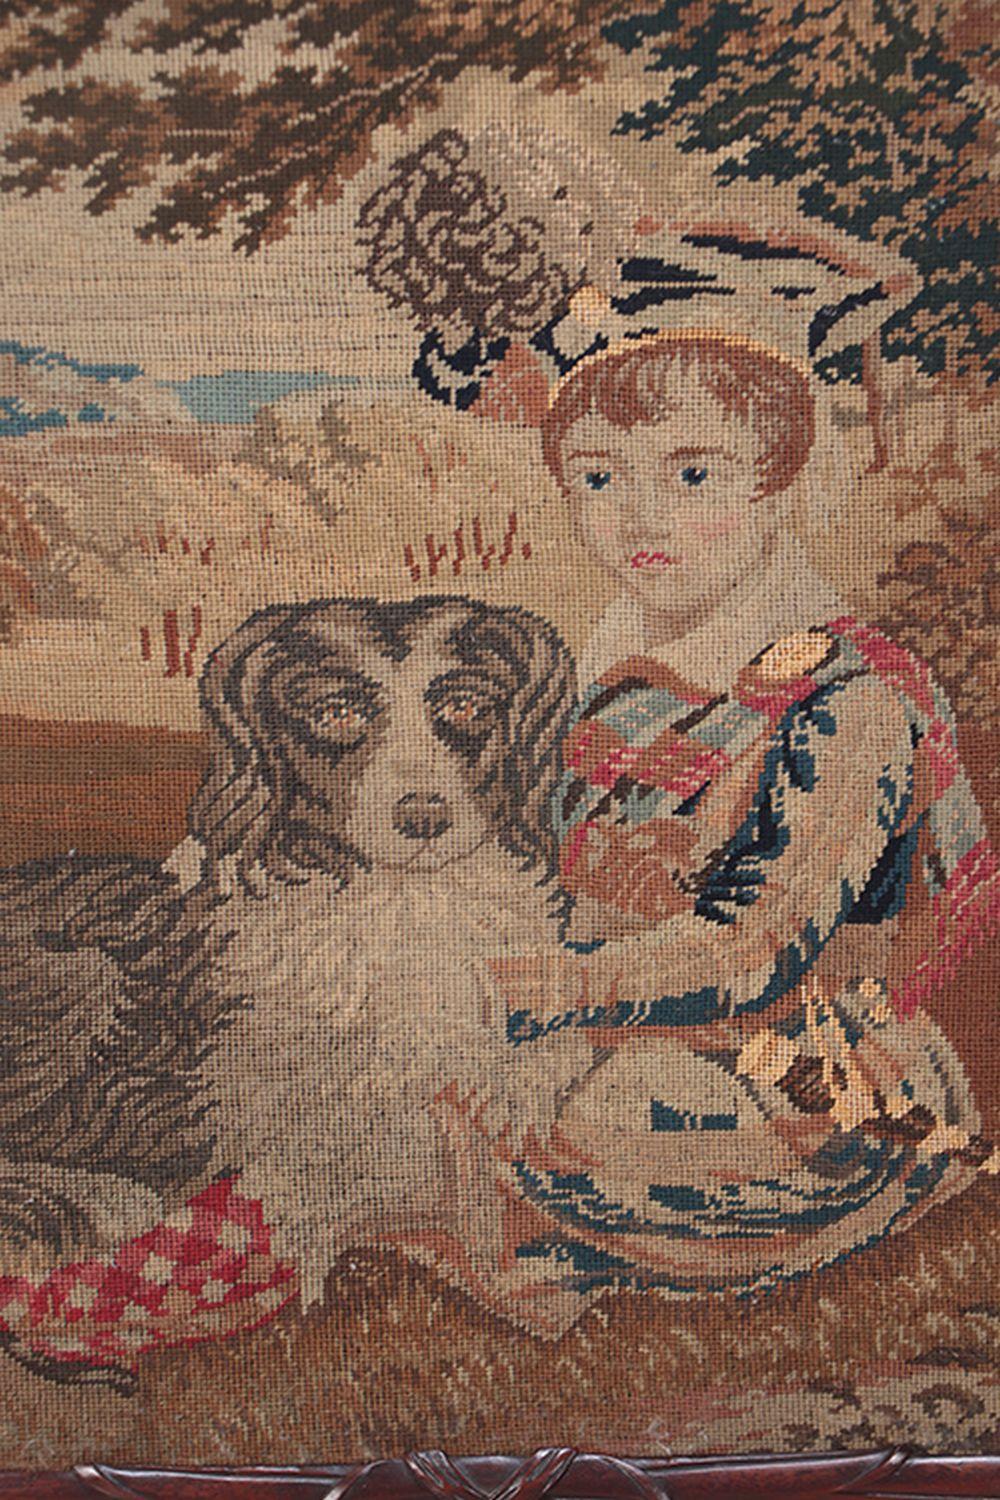 19th century Needlepoint firescreen depicting boy and dog on wood frame.
Measures: 40